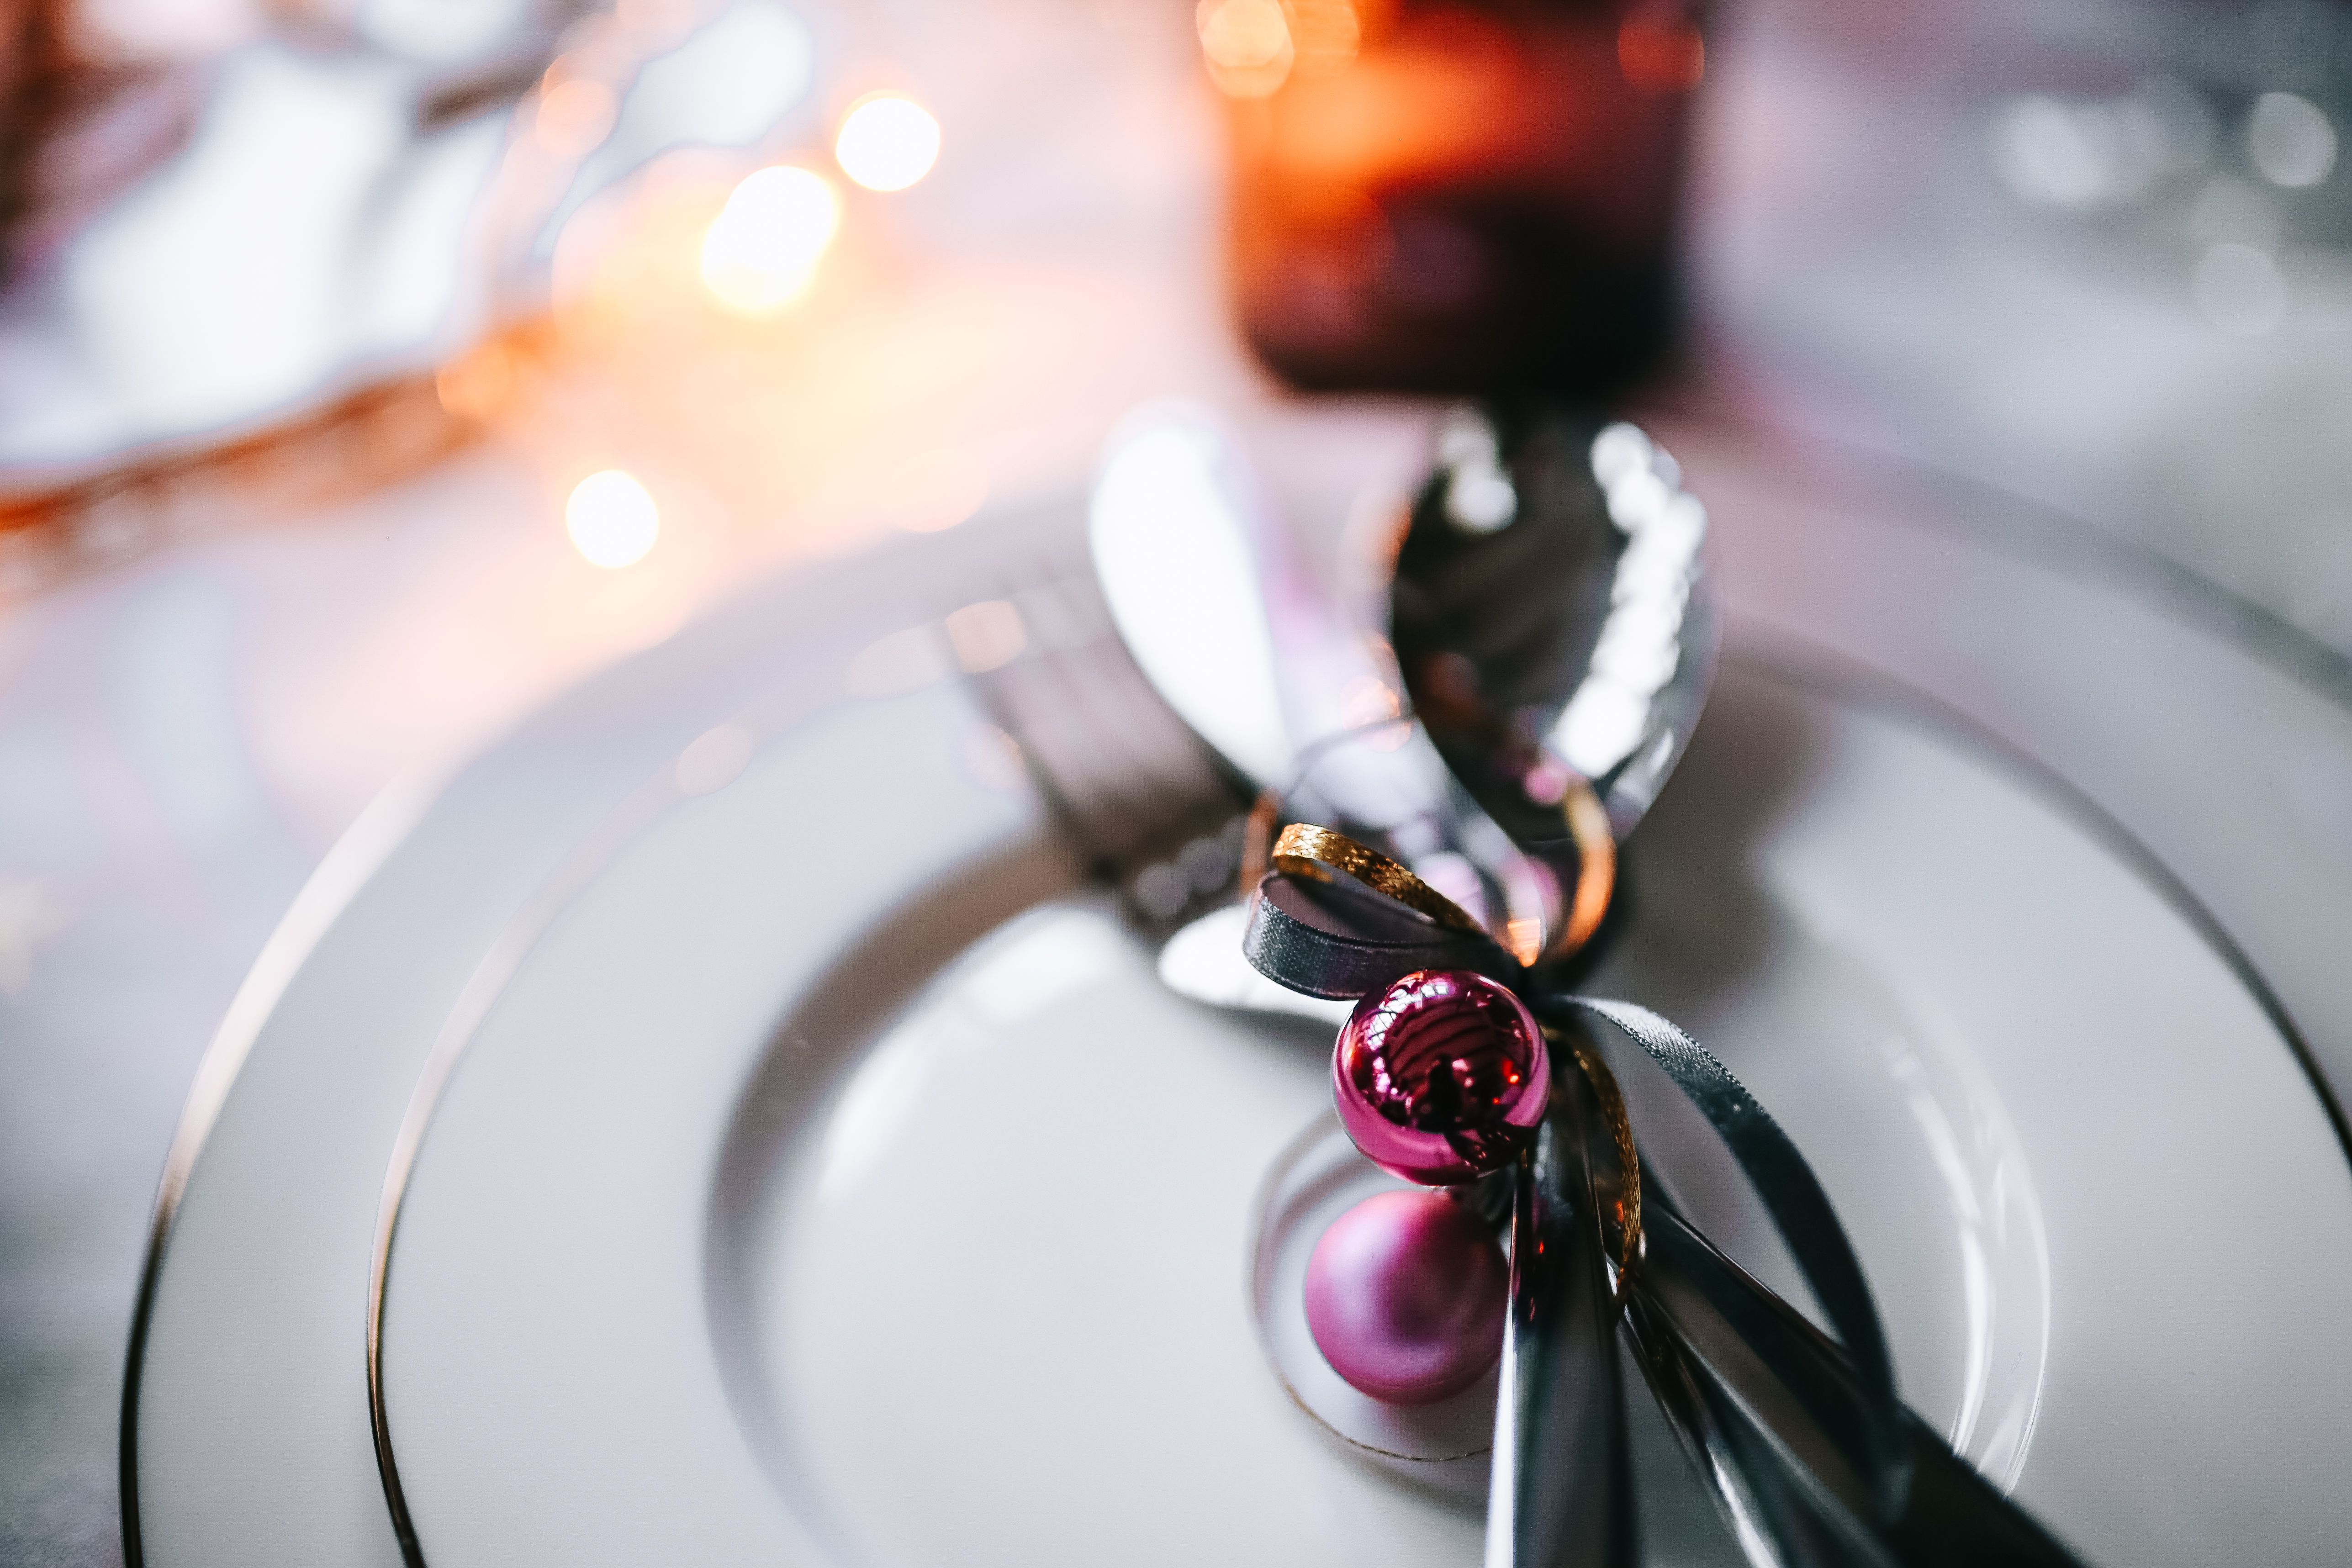 Christmas Holiday Tablescape